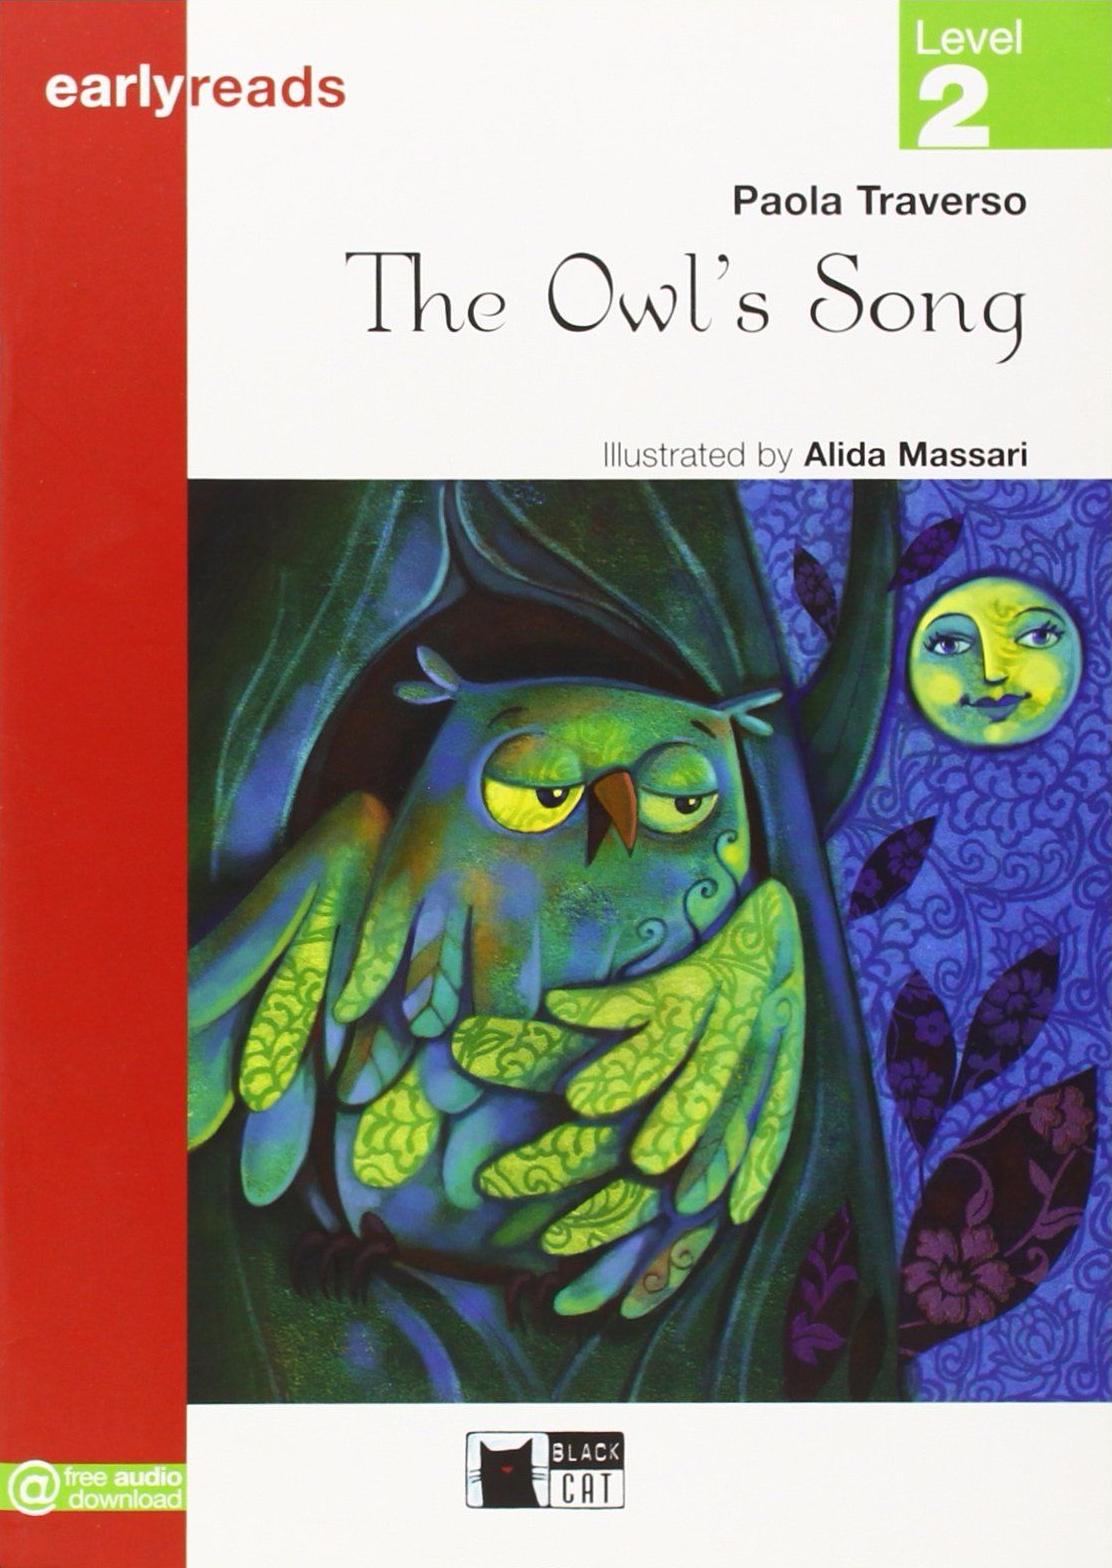 OWL'S SONG,THE (EARLYREADS LEVEL 2)  Book 